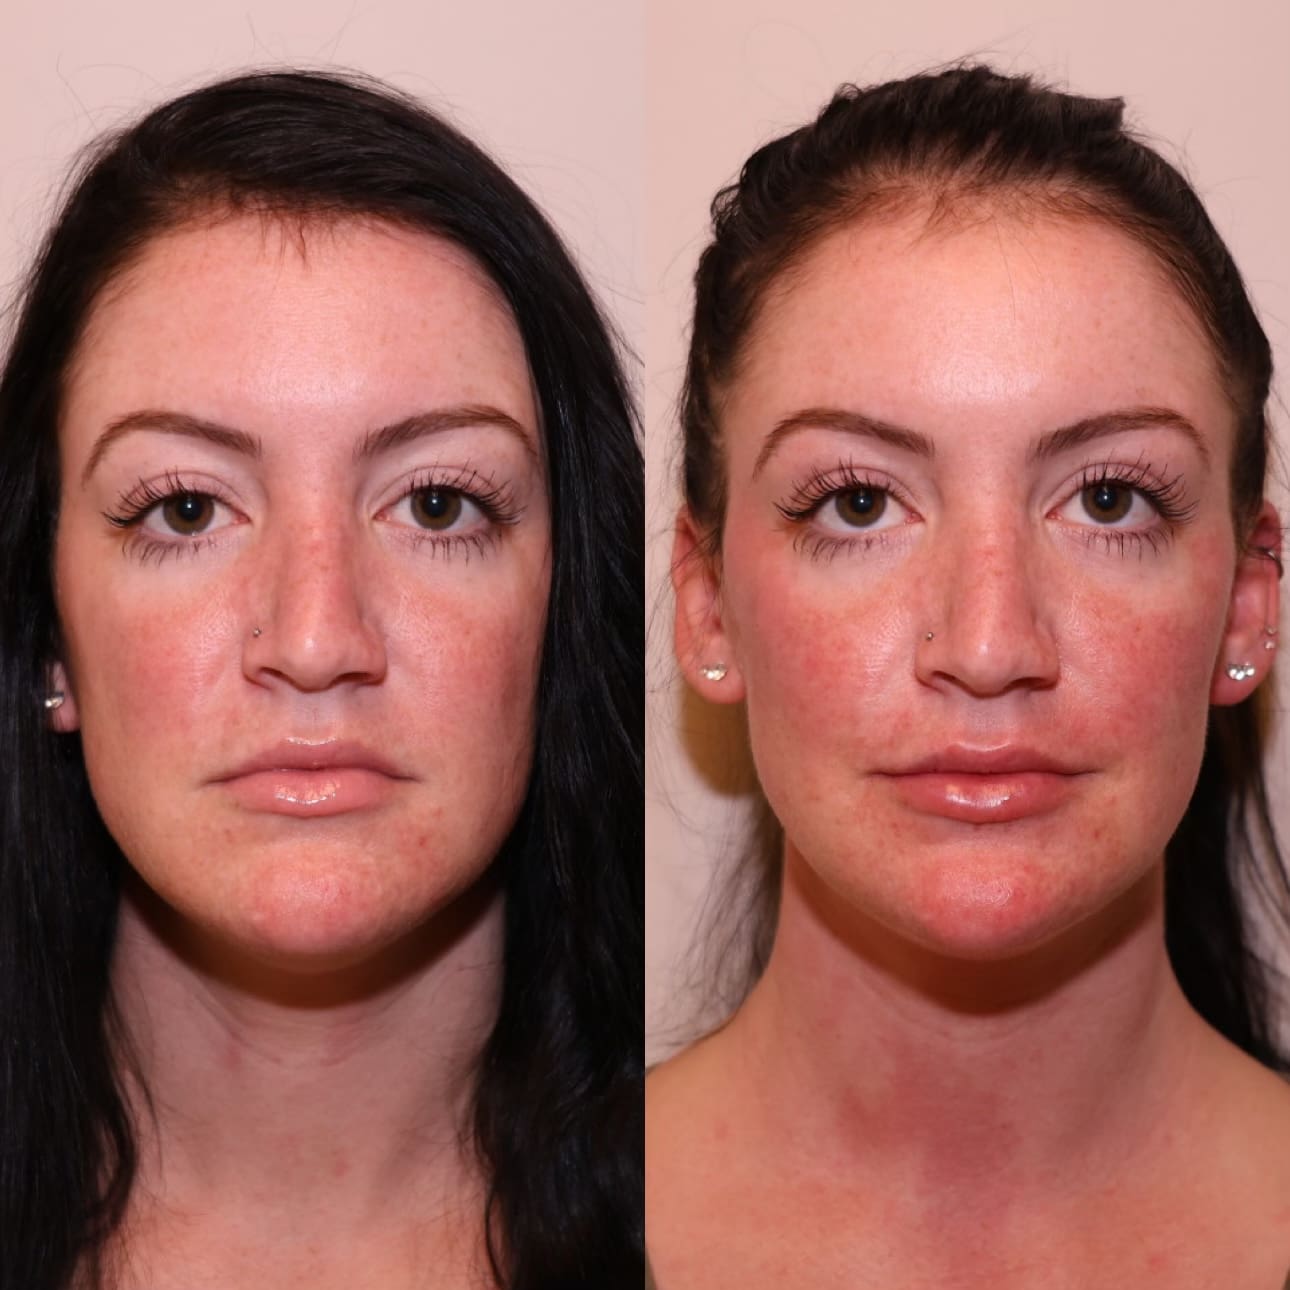 Before and after - lip and cheek filler front view